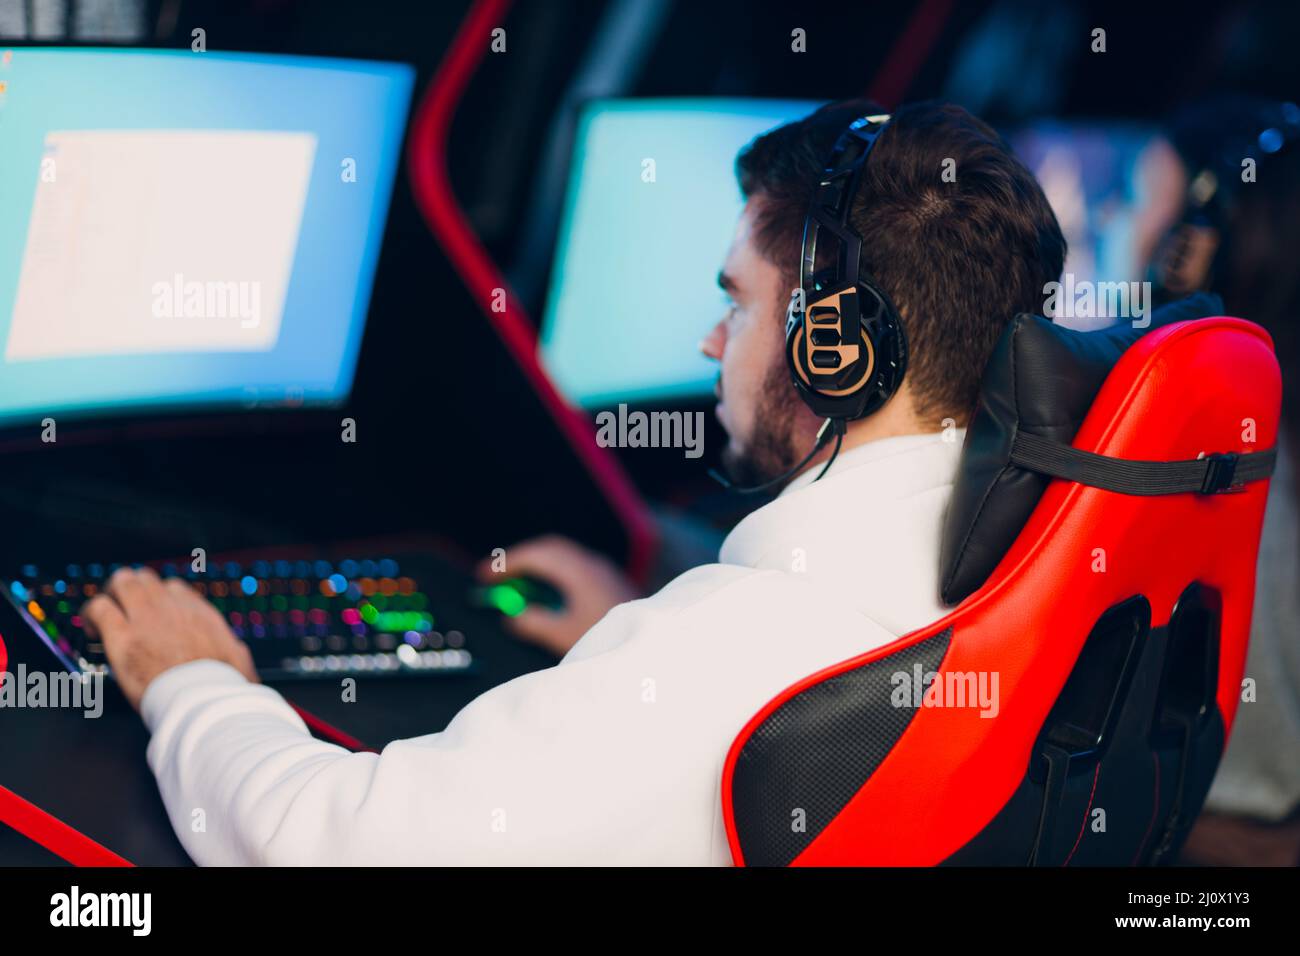 Guy playing gaming game on computer at game club Stock Photo